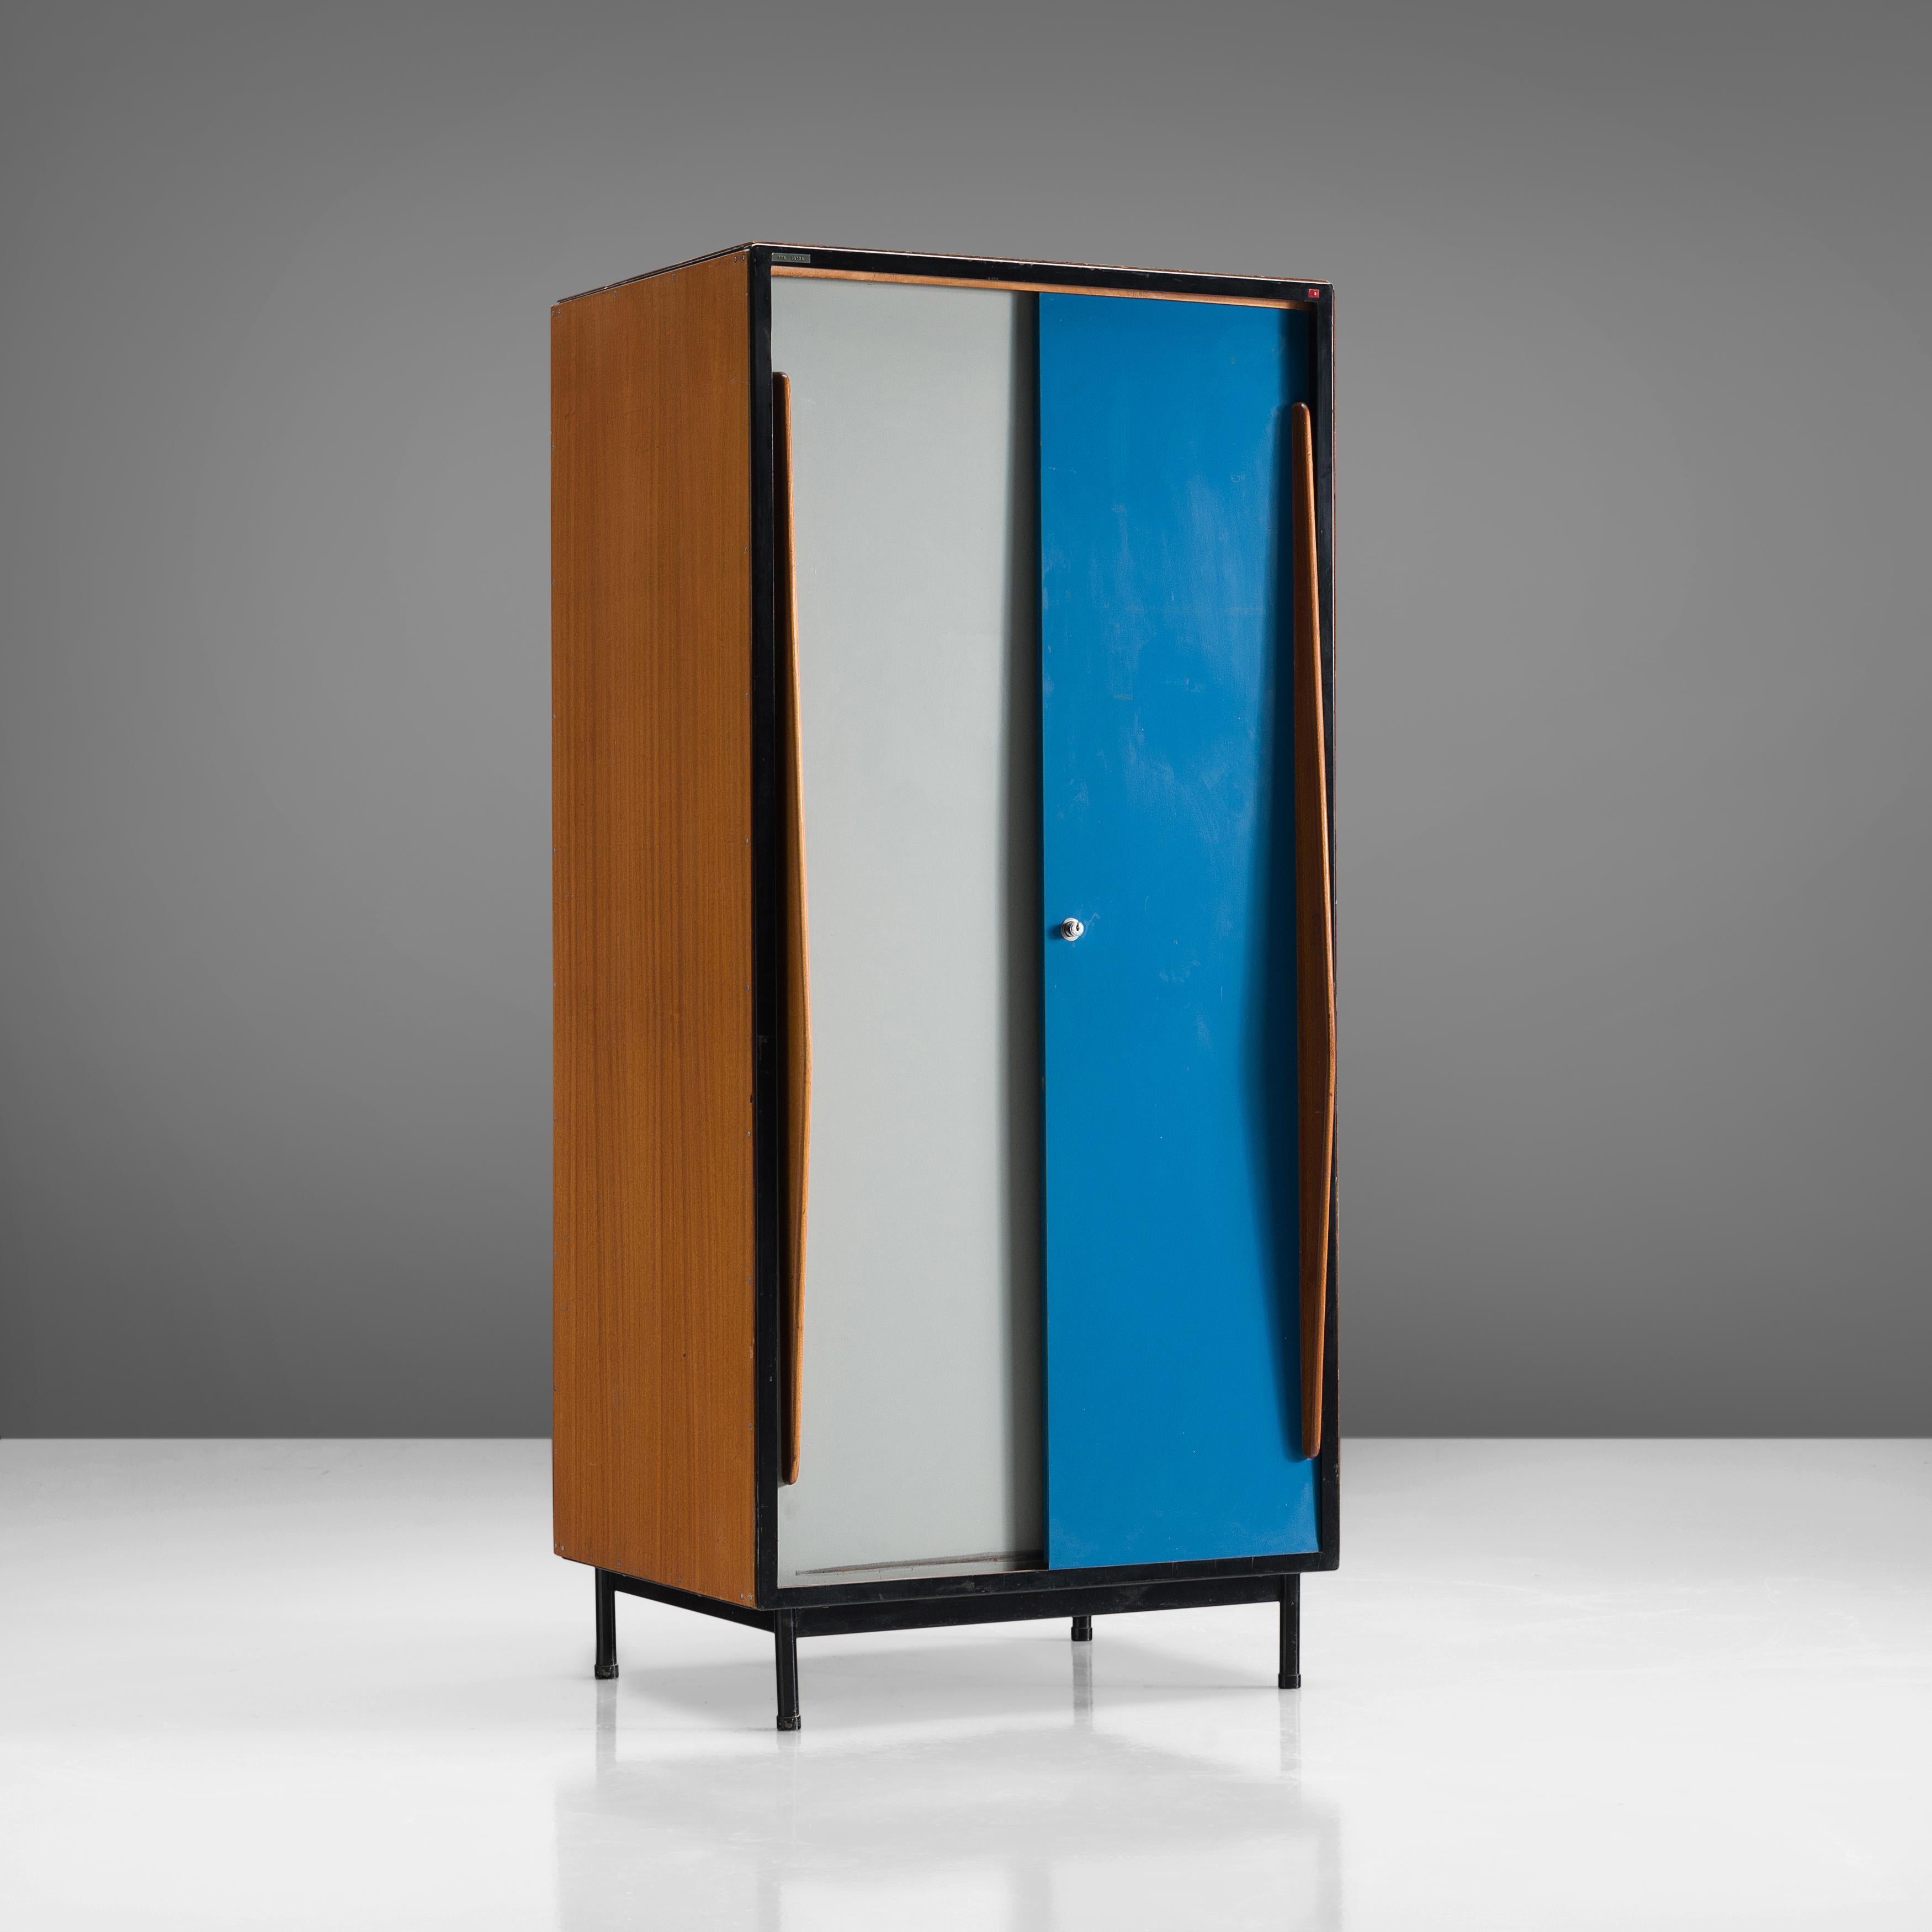 Willy Van Der Meeren for Tubax, cabinet, wood, mahogany, metal, Belgium, design 1952

Early example of Industrial Design from the Belgium modernist stream, designed by Willy Van Der Meeren. Originally designed for use in school buildings, this